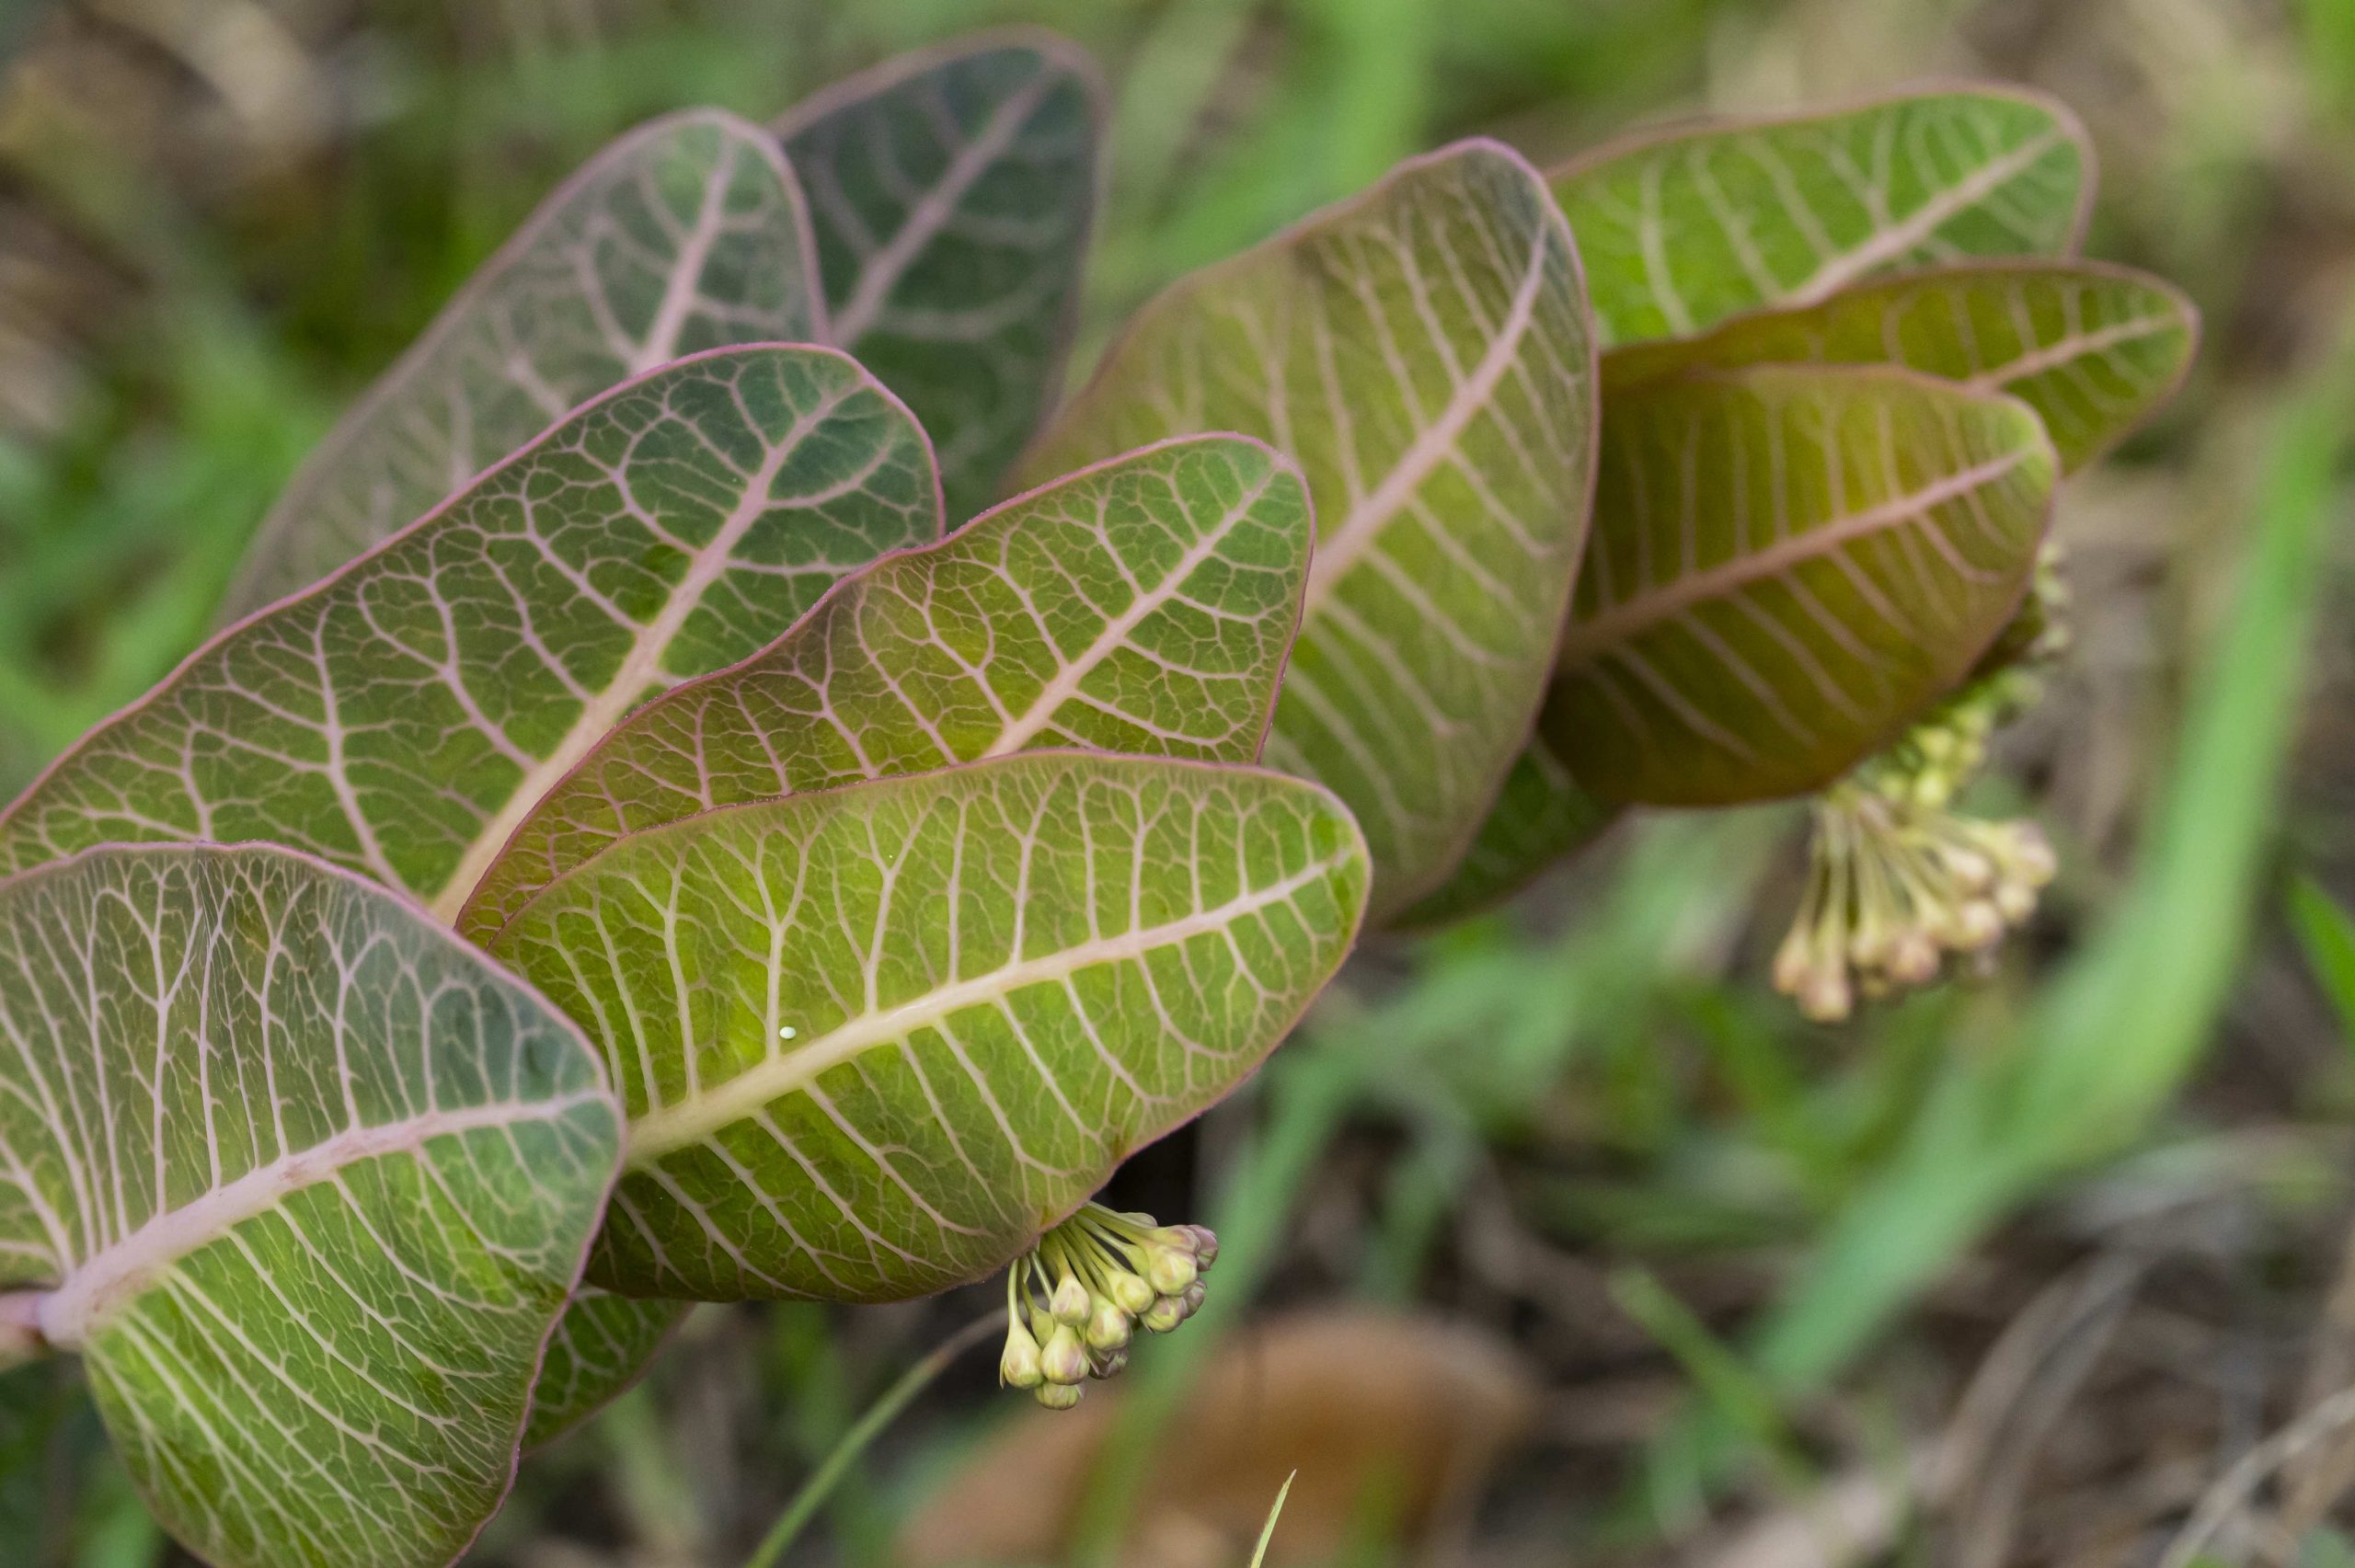 Close up photograph of a pinewoods milkweed plant